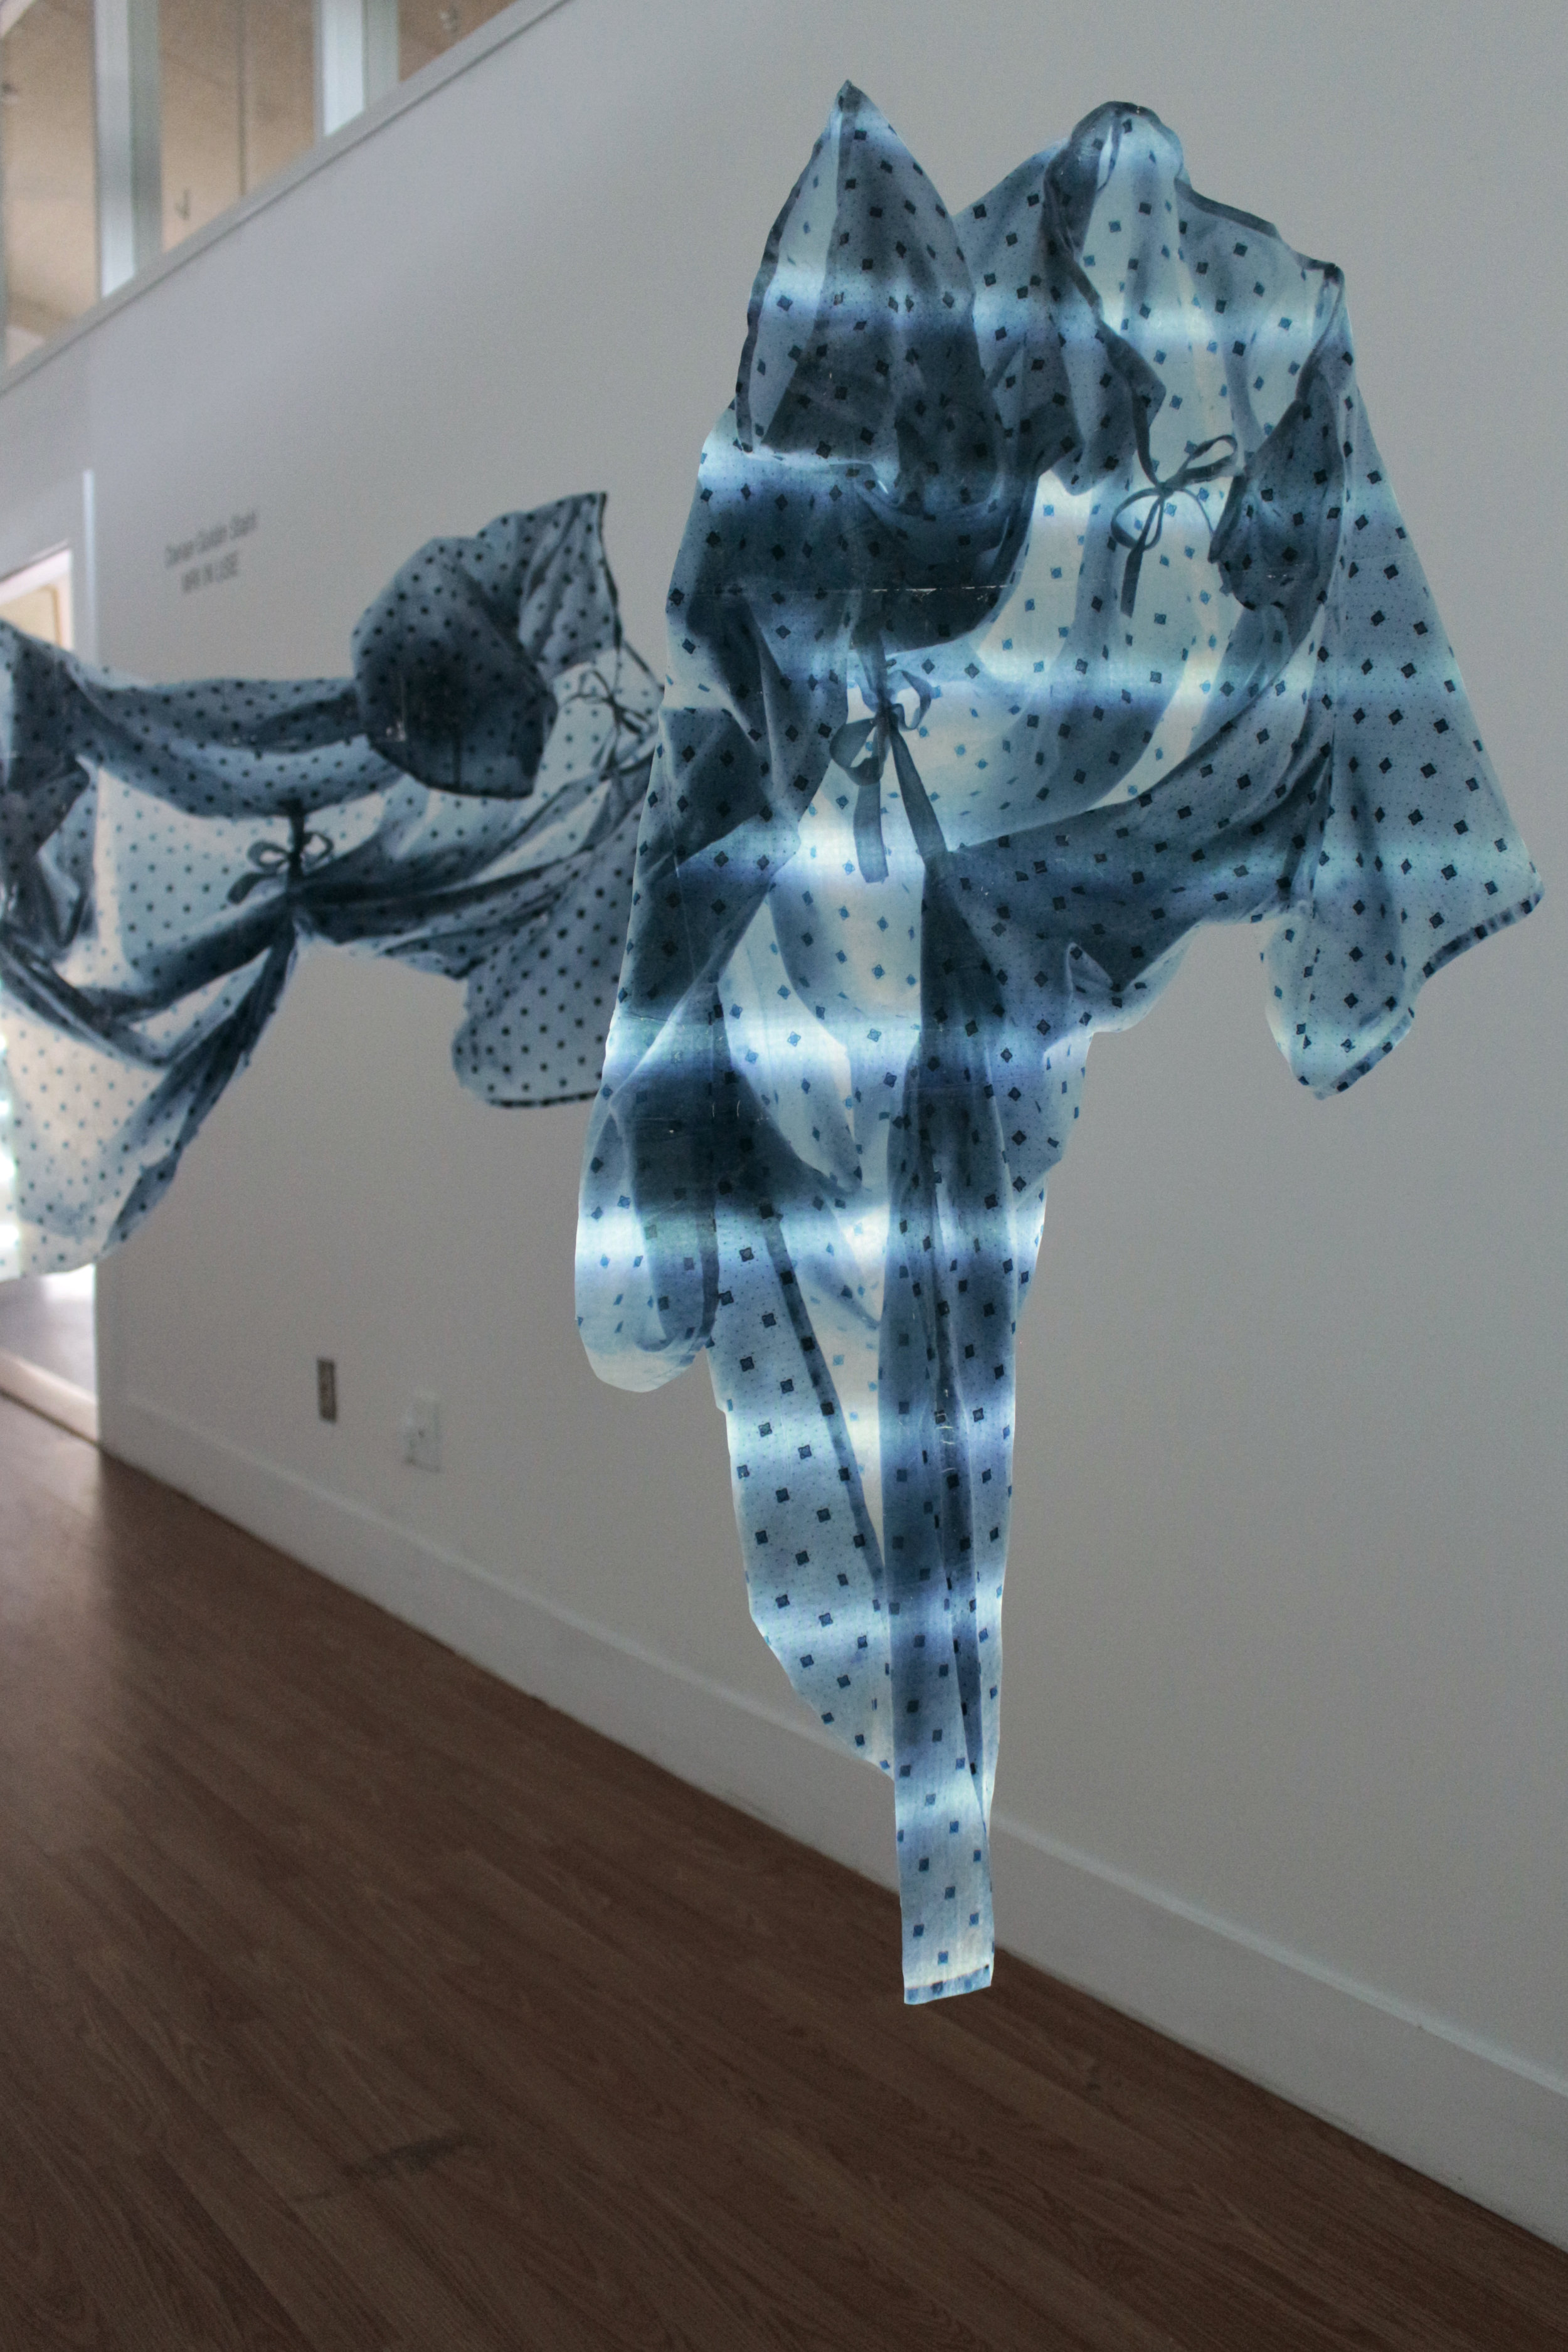 "MRI IN USE" Installation, Encaustic transfer on silk and projection, 45" x 30" each, 2015. Alberta Printmakers Main Gallery